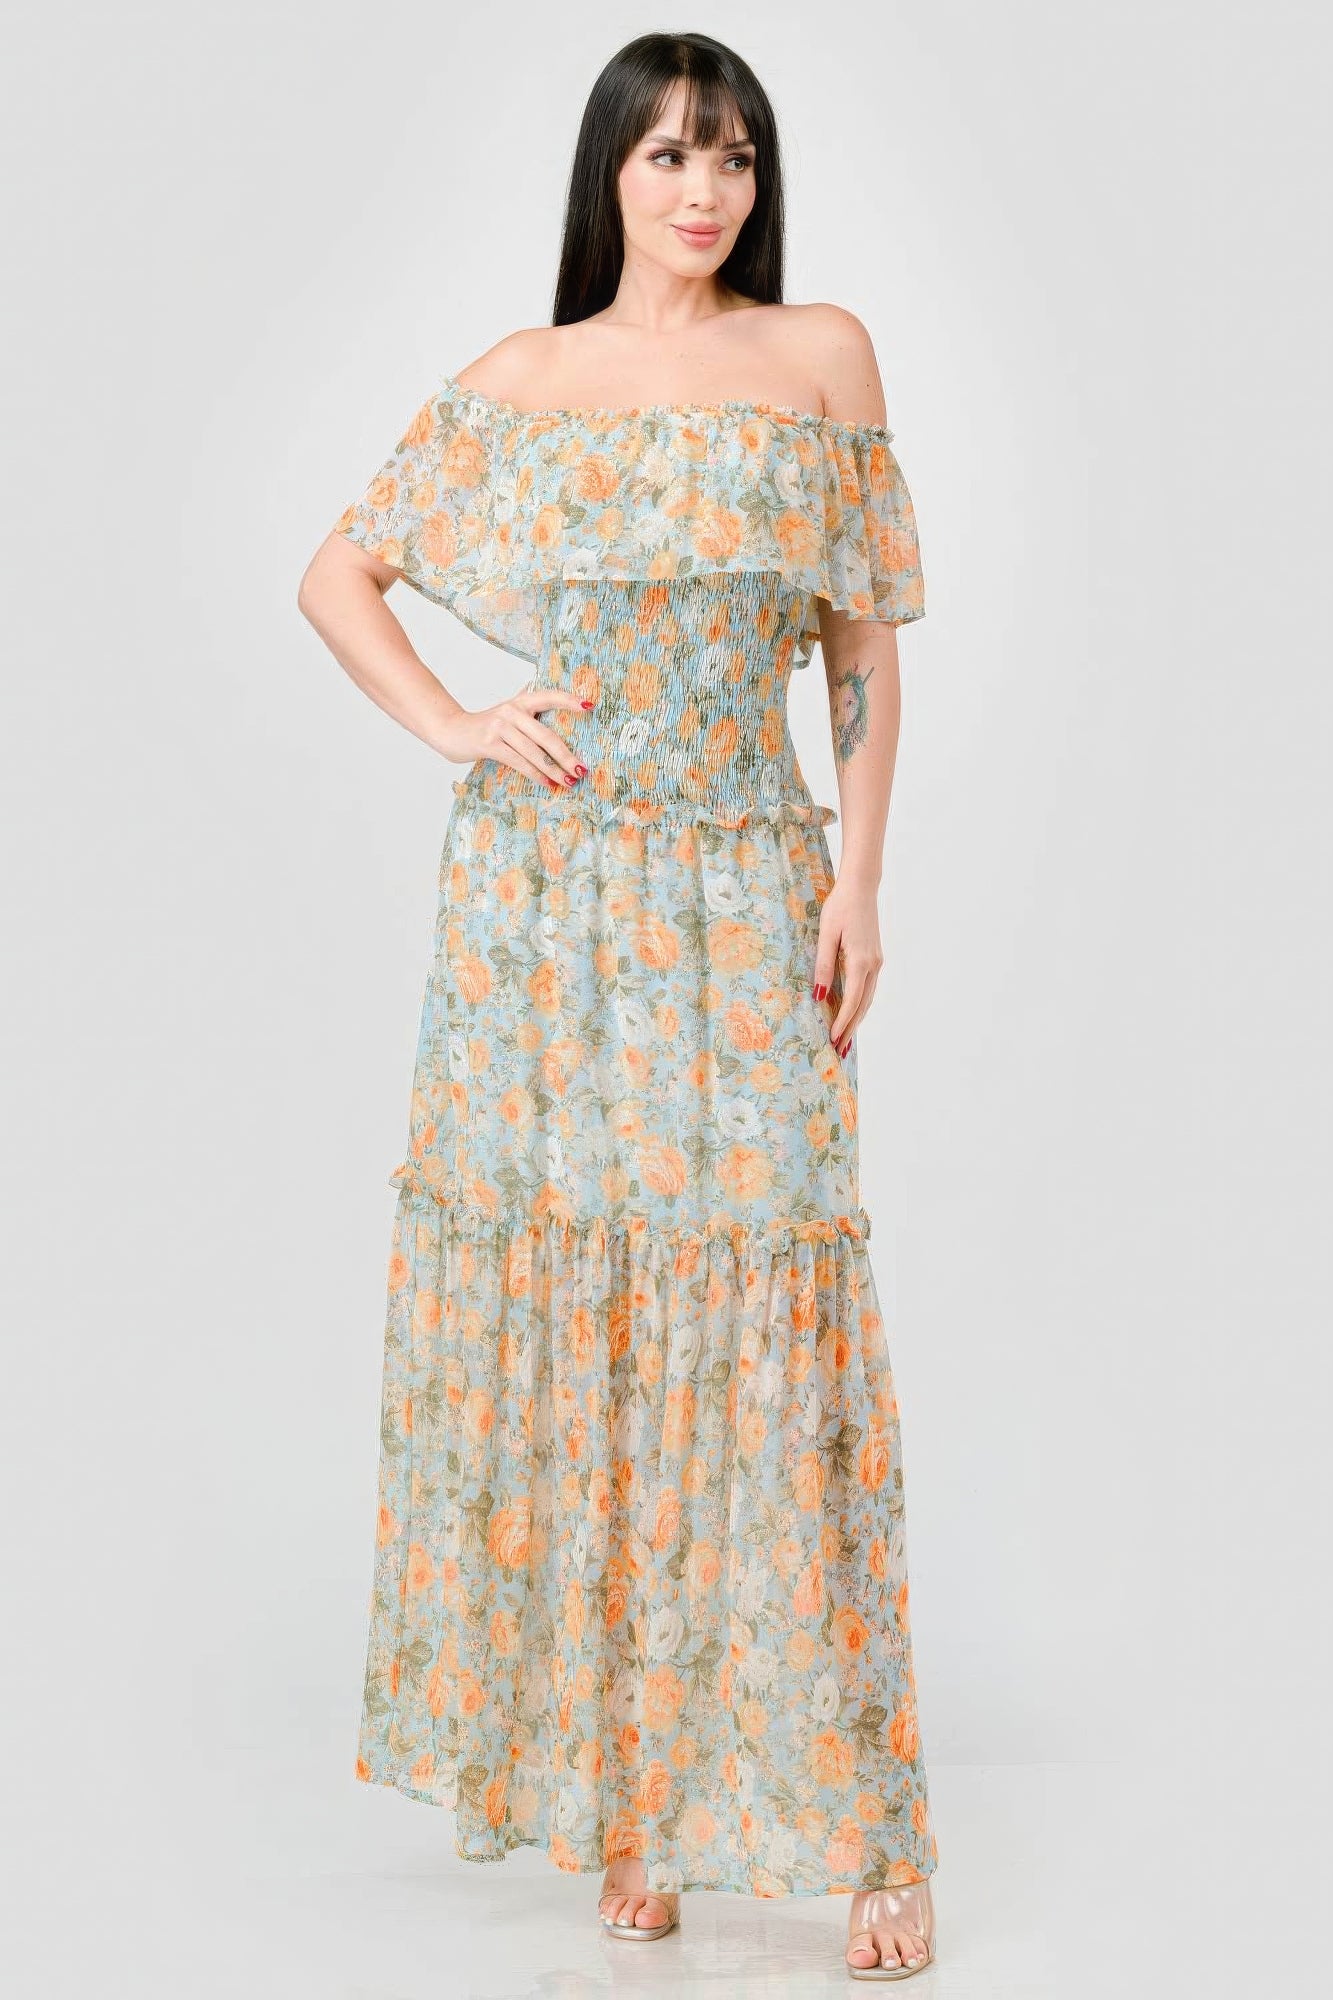 THE MARLIE Floral Chiffon Off Shoulder Smocked Back Ruffled Tiered Maxi Dress